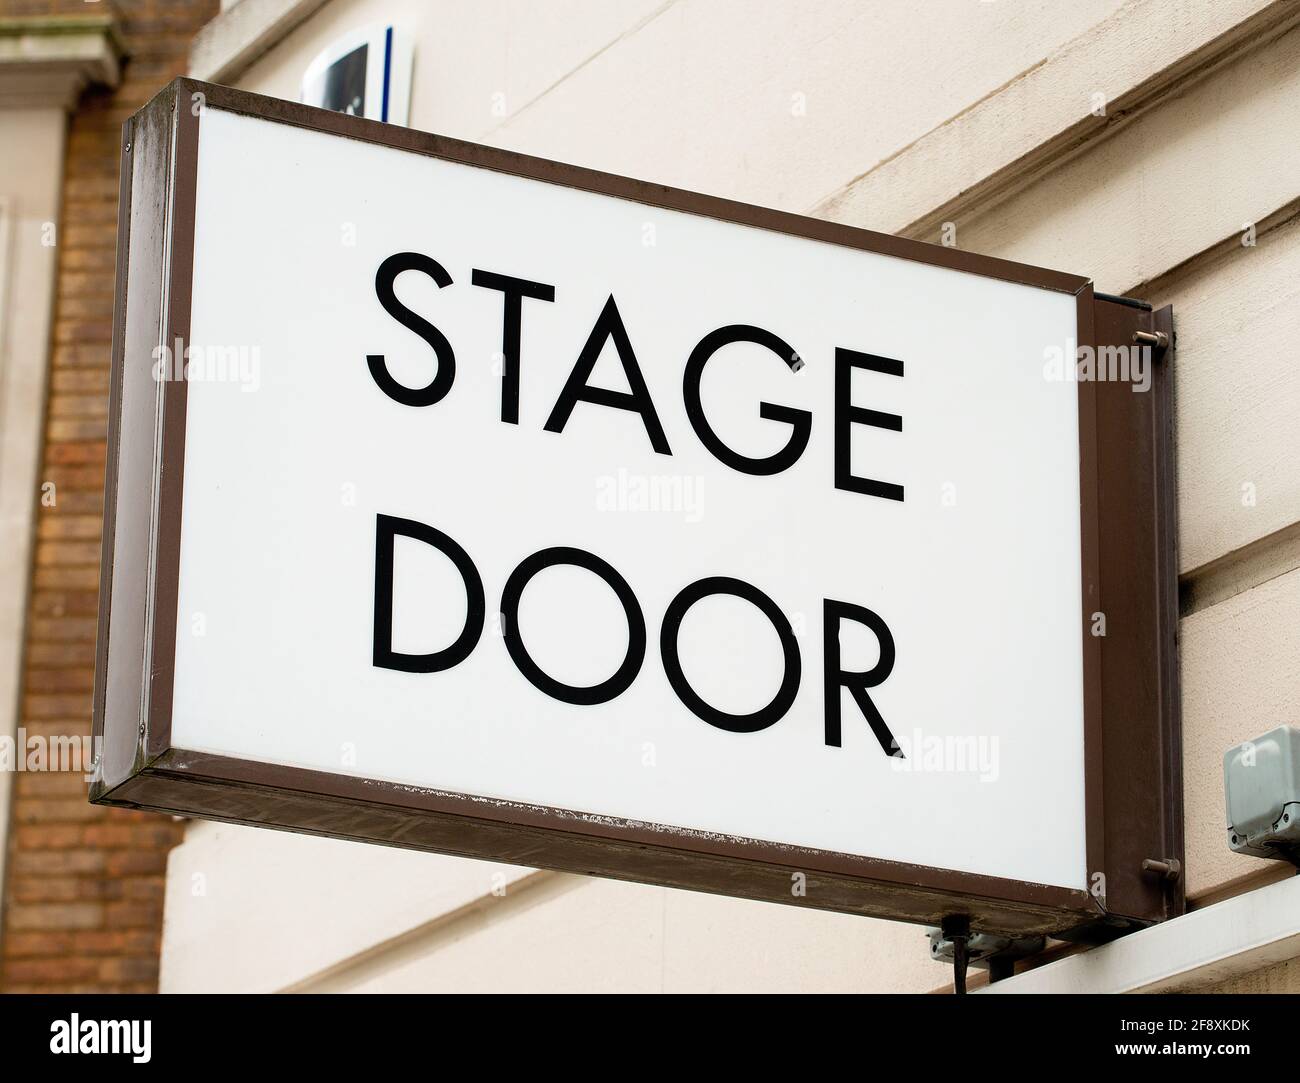 Low angle view of STAGE DOOR sign attached to the exterior wall of theatre in London's West End. Stock Photo